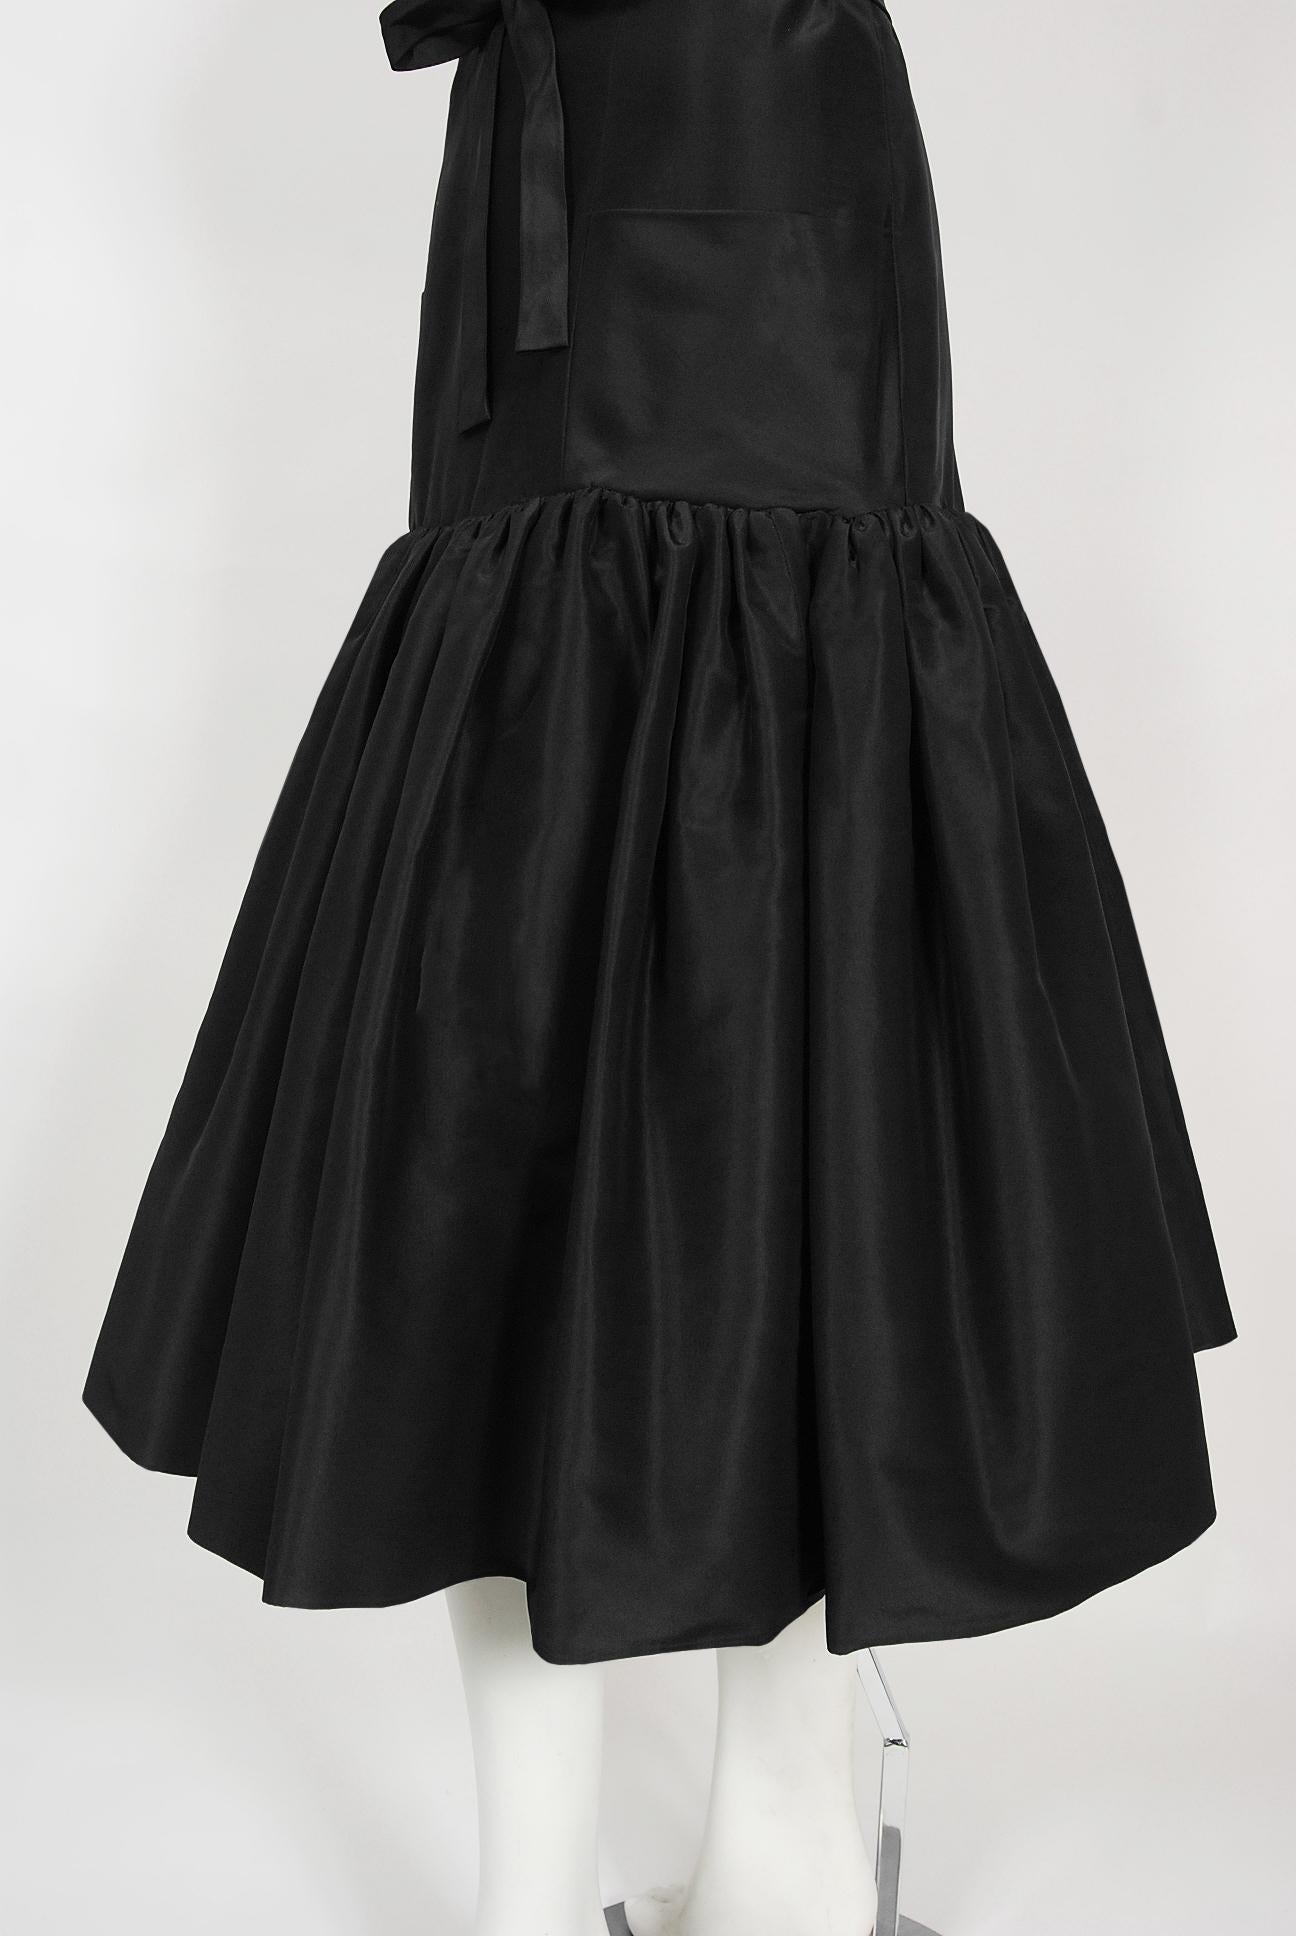 Vintage 1950's Traina-Norell Couture Black Silk Belted Flounce Cocktail Dress 2